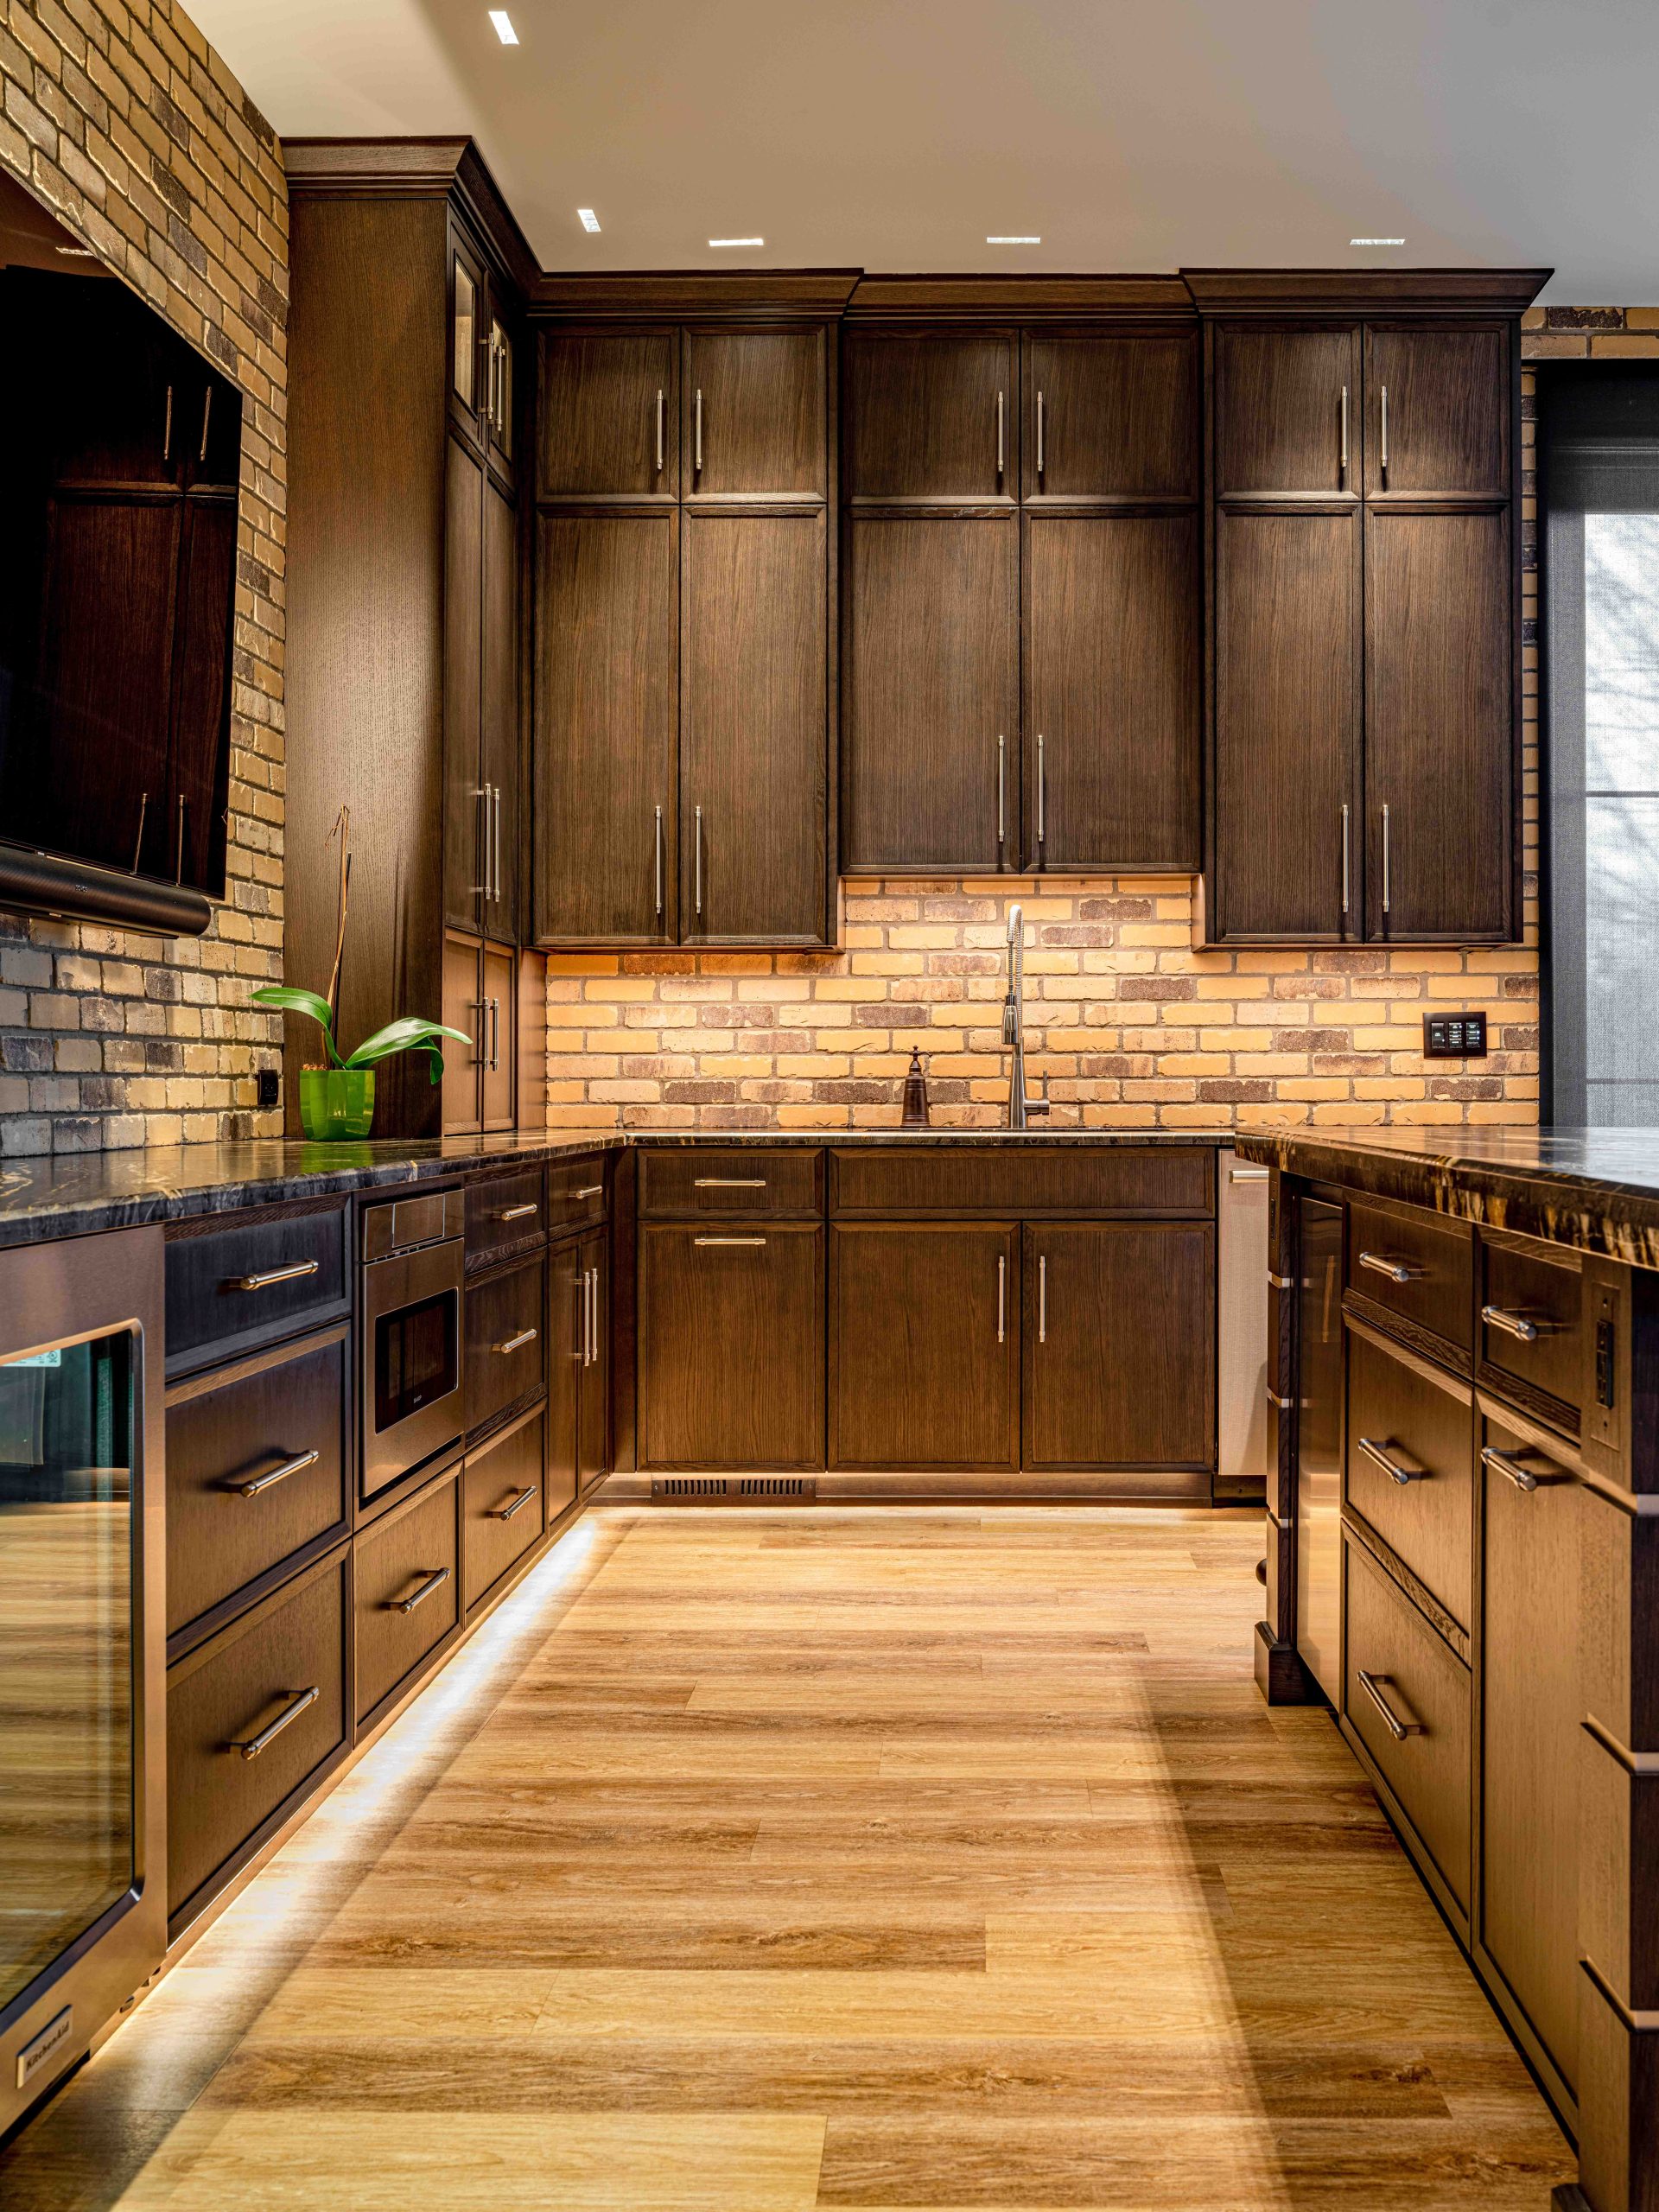 Wooden kitchen cabinets with light brown floor